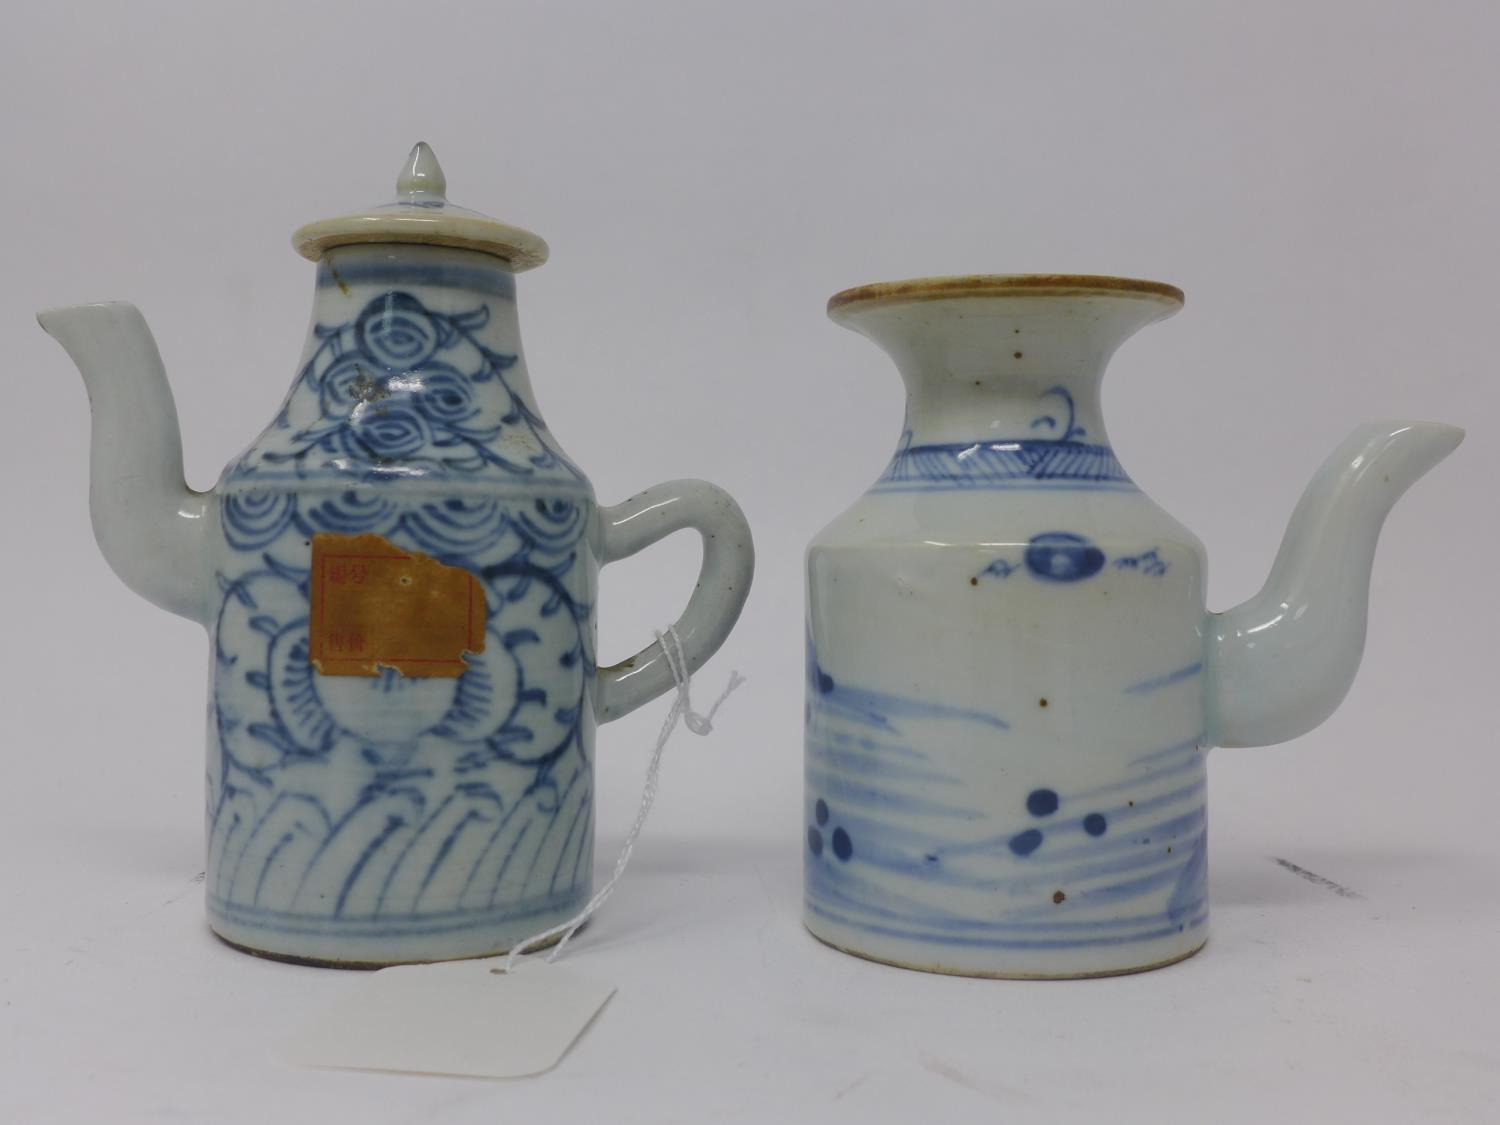 Two 19th century Chinese blue & white porcelain tea pots - Image 2 of 2